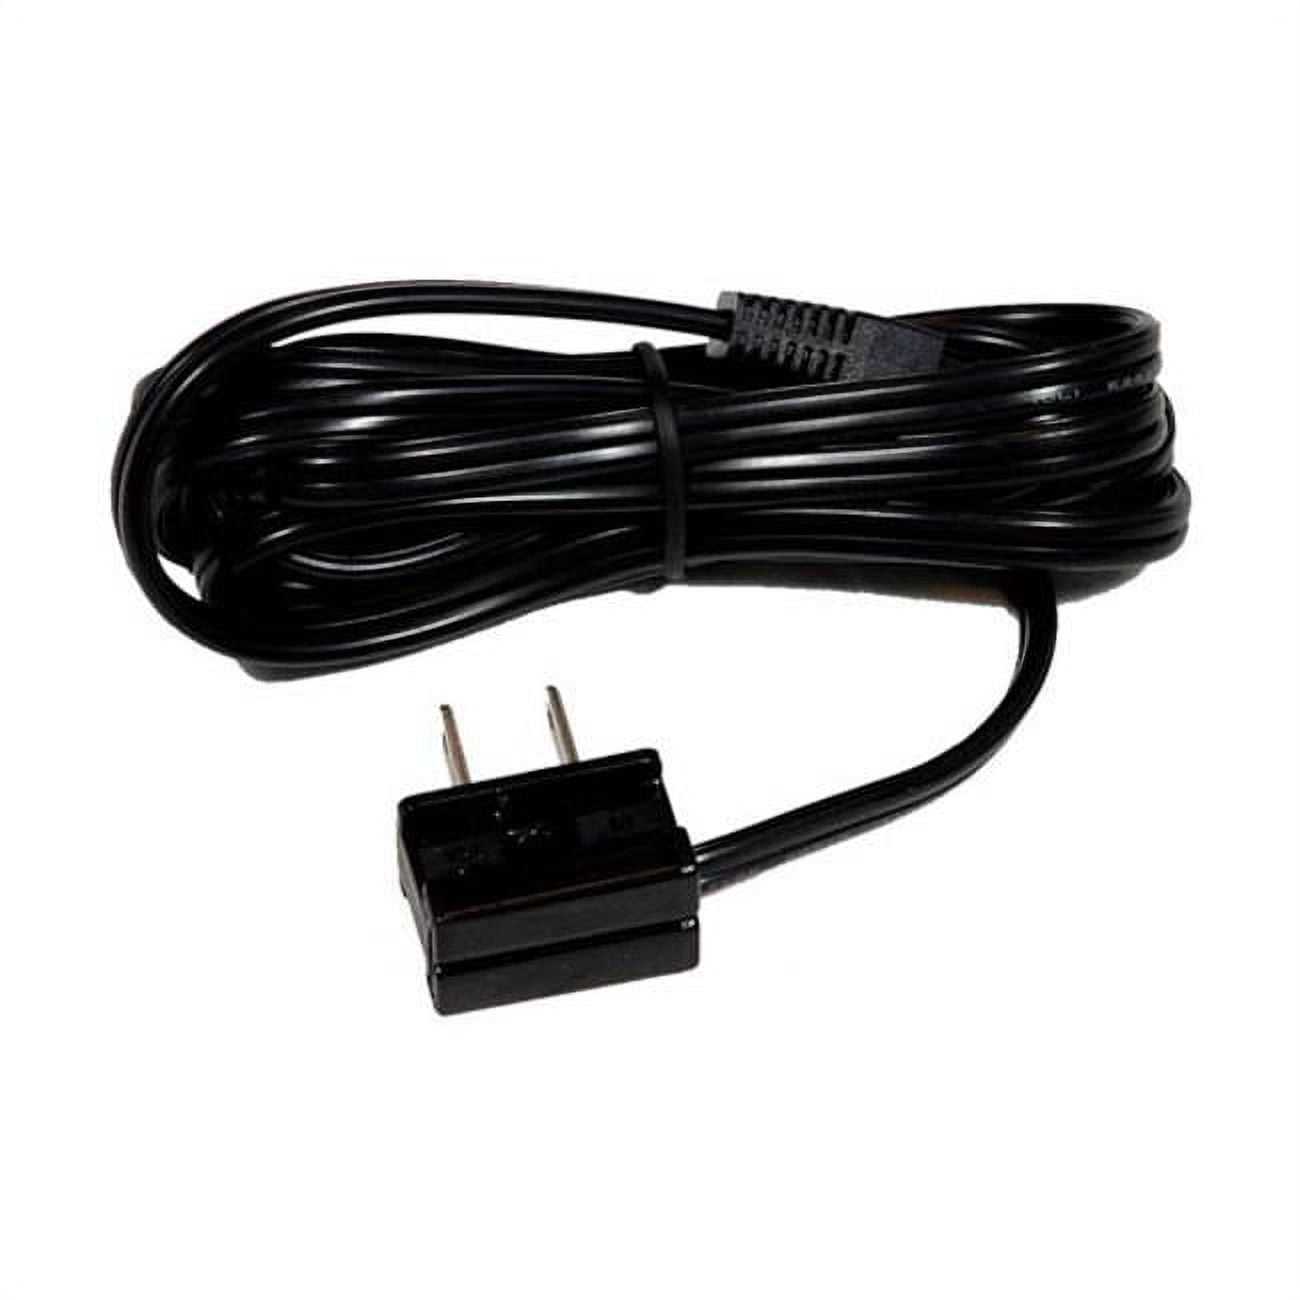 Picture of AmericanLighting ALLVP-PC6 6 ft. Power Cord with roller switch for LED puck lights, 120 V - Black